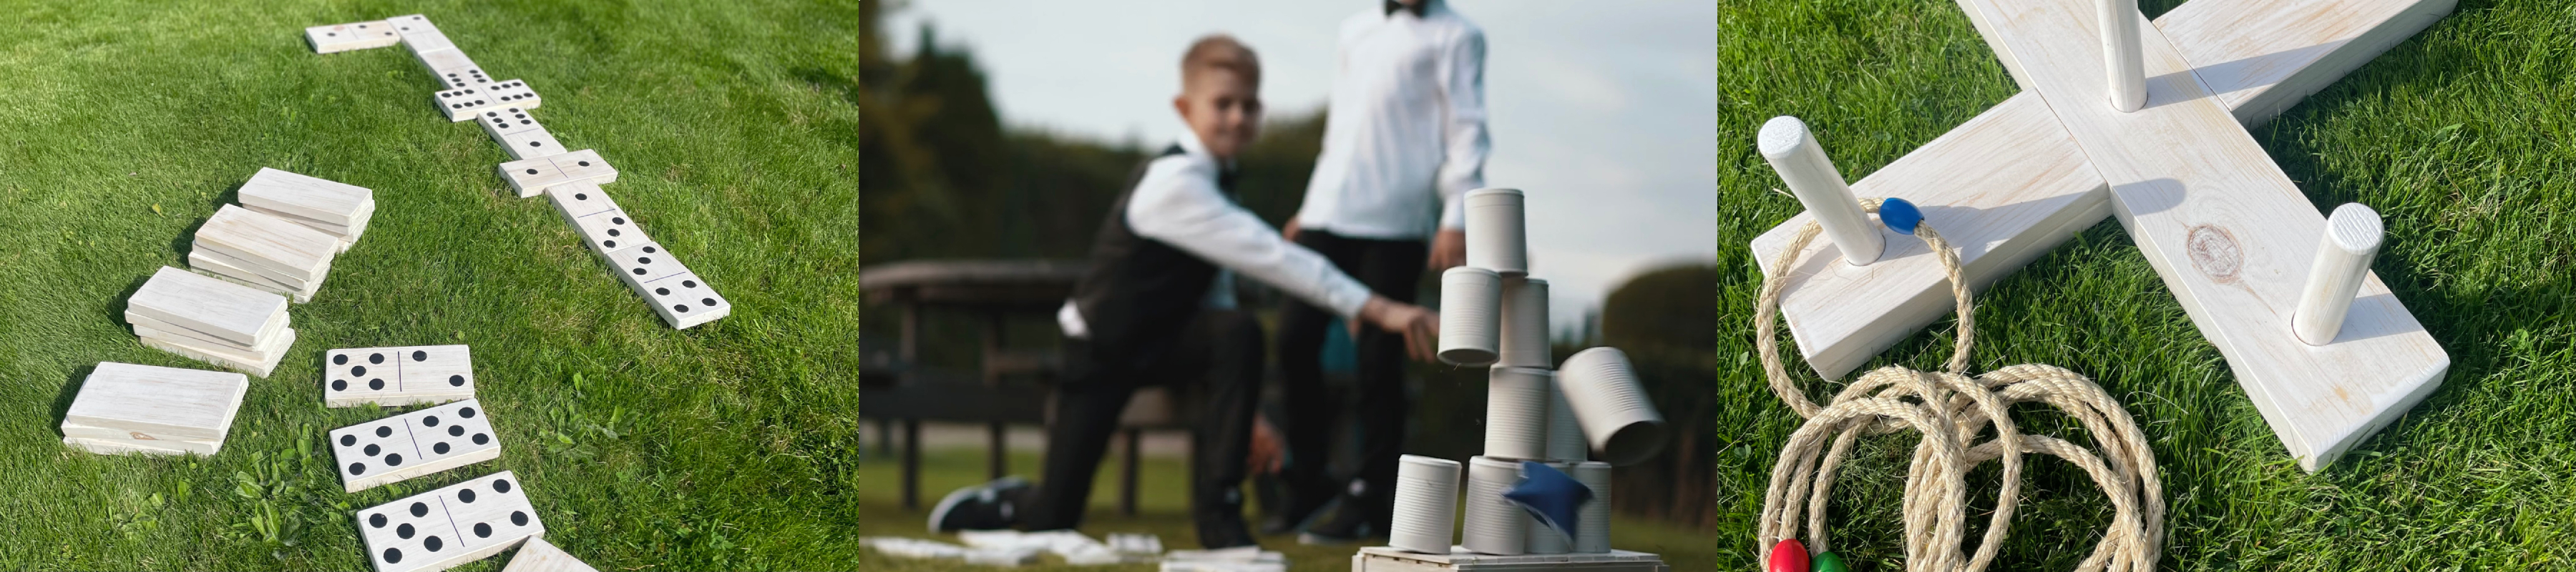 lawn games for weddings: young boys in tuxedos laughing while throwing bean bags at tin cans, with giant wooden dominos and hooplah games either side of them